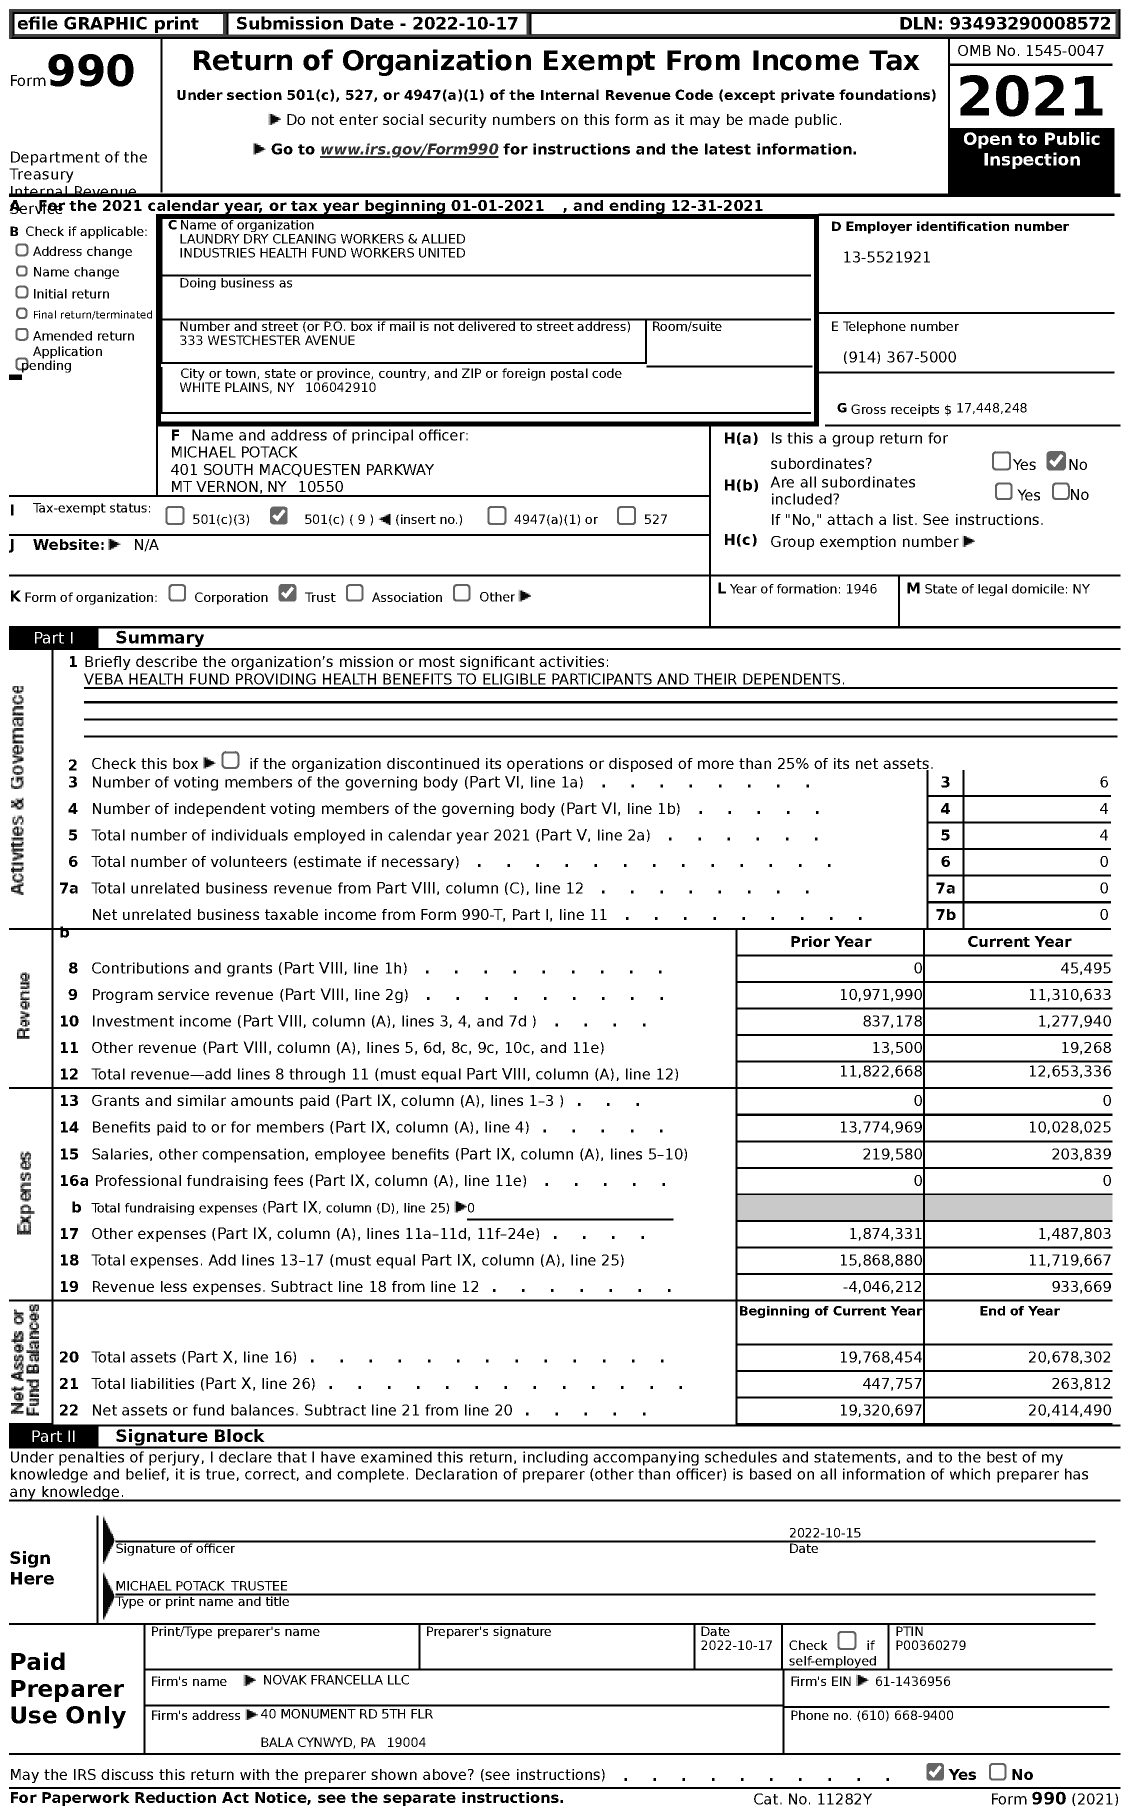 Image of first page of 2021 Form 990 for LAUNDRY DRY CLEANING Wokers and Allied INDUSTRIES HEALTH FUND WORKERS united